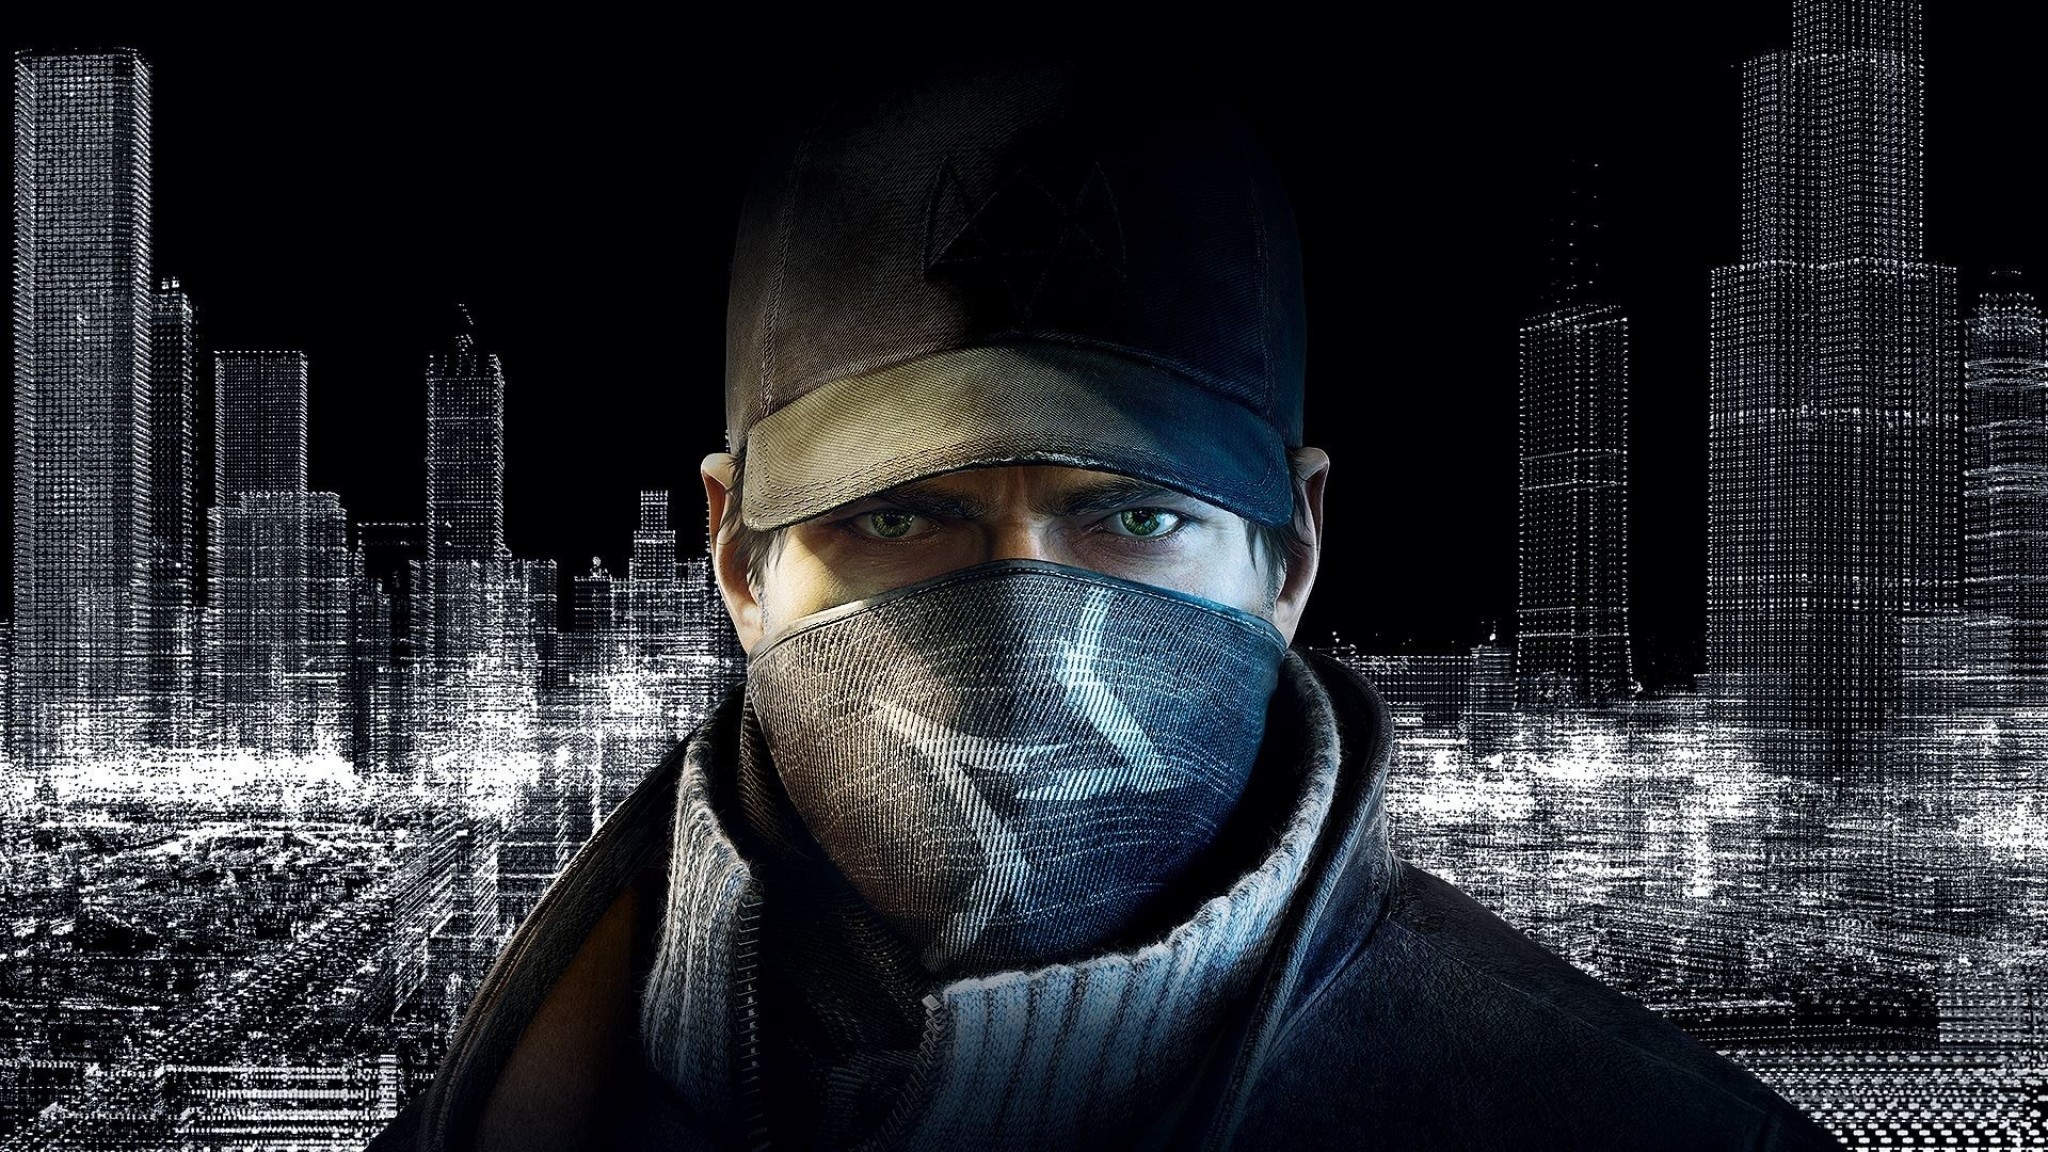 Watch Dogs iPhone Wallpapers Top 25 Best Watch Dogs iPhone Wallpapers   Getty Wallpapers